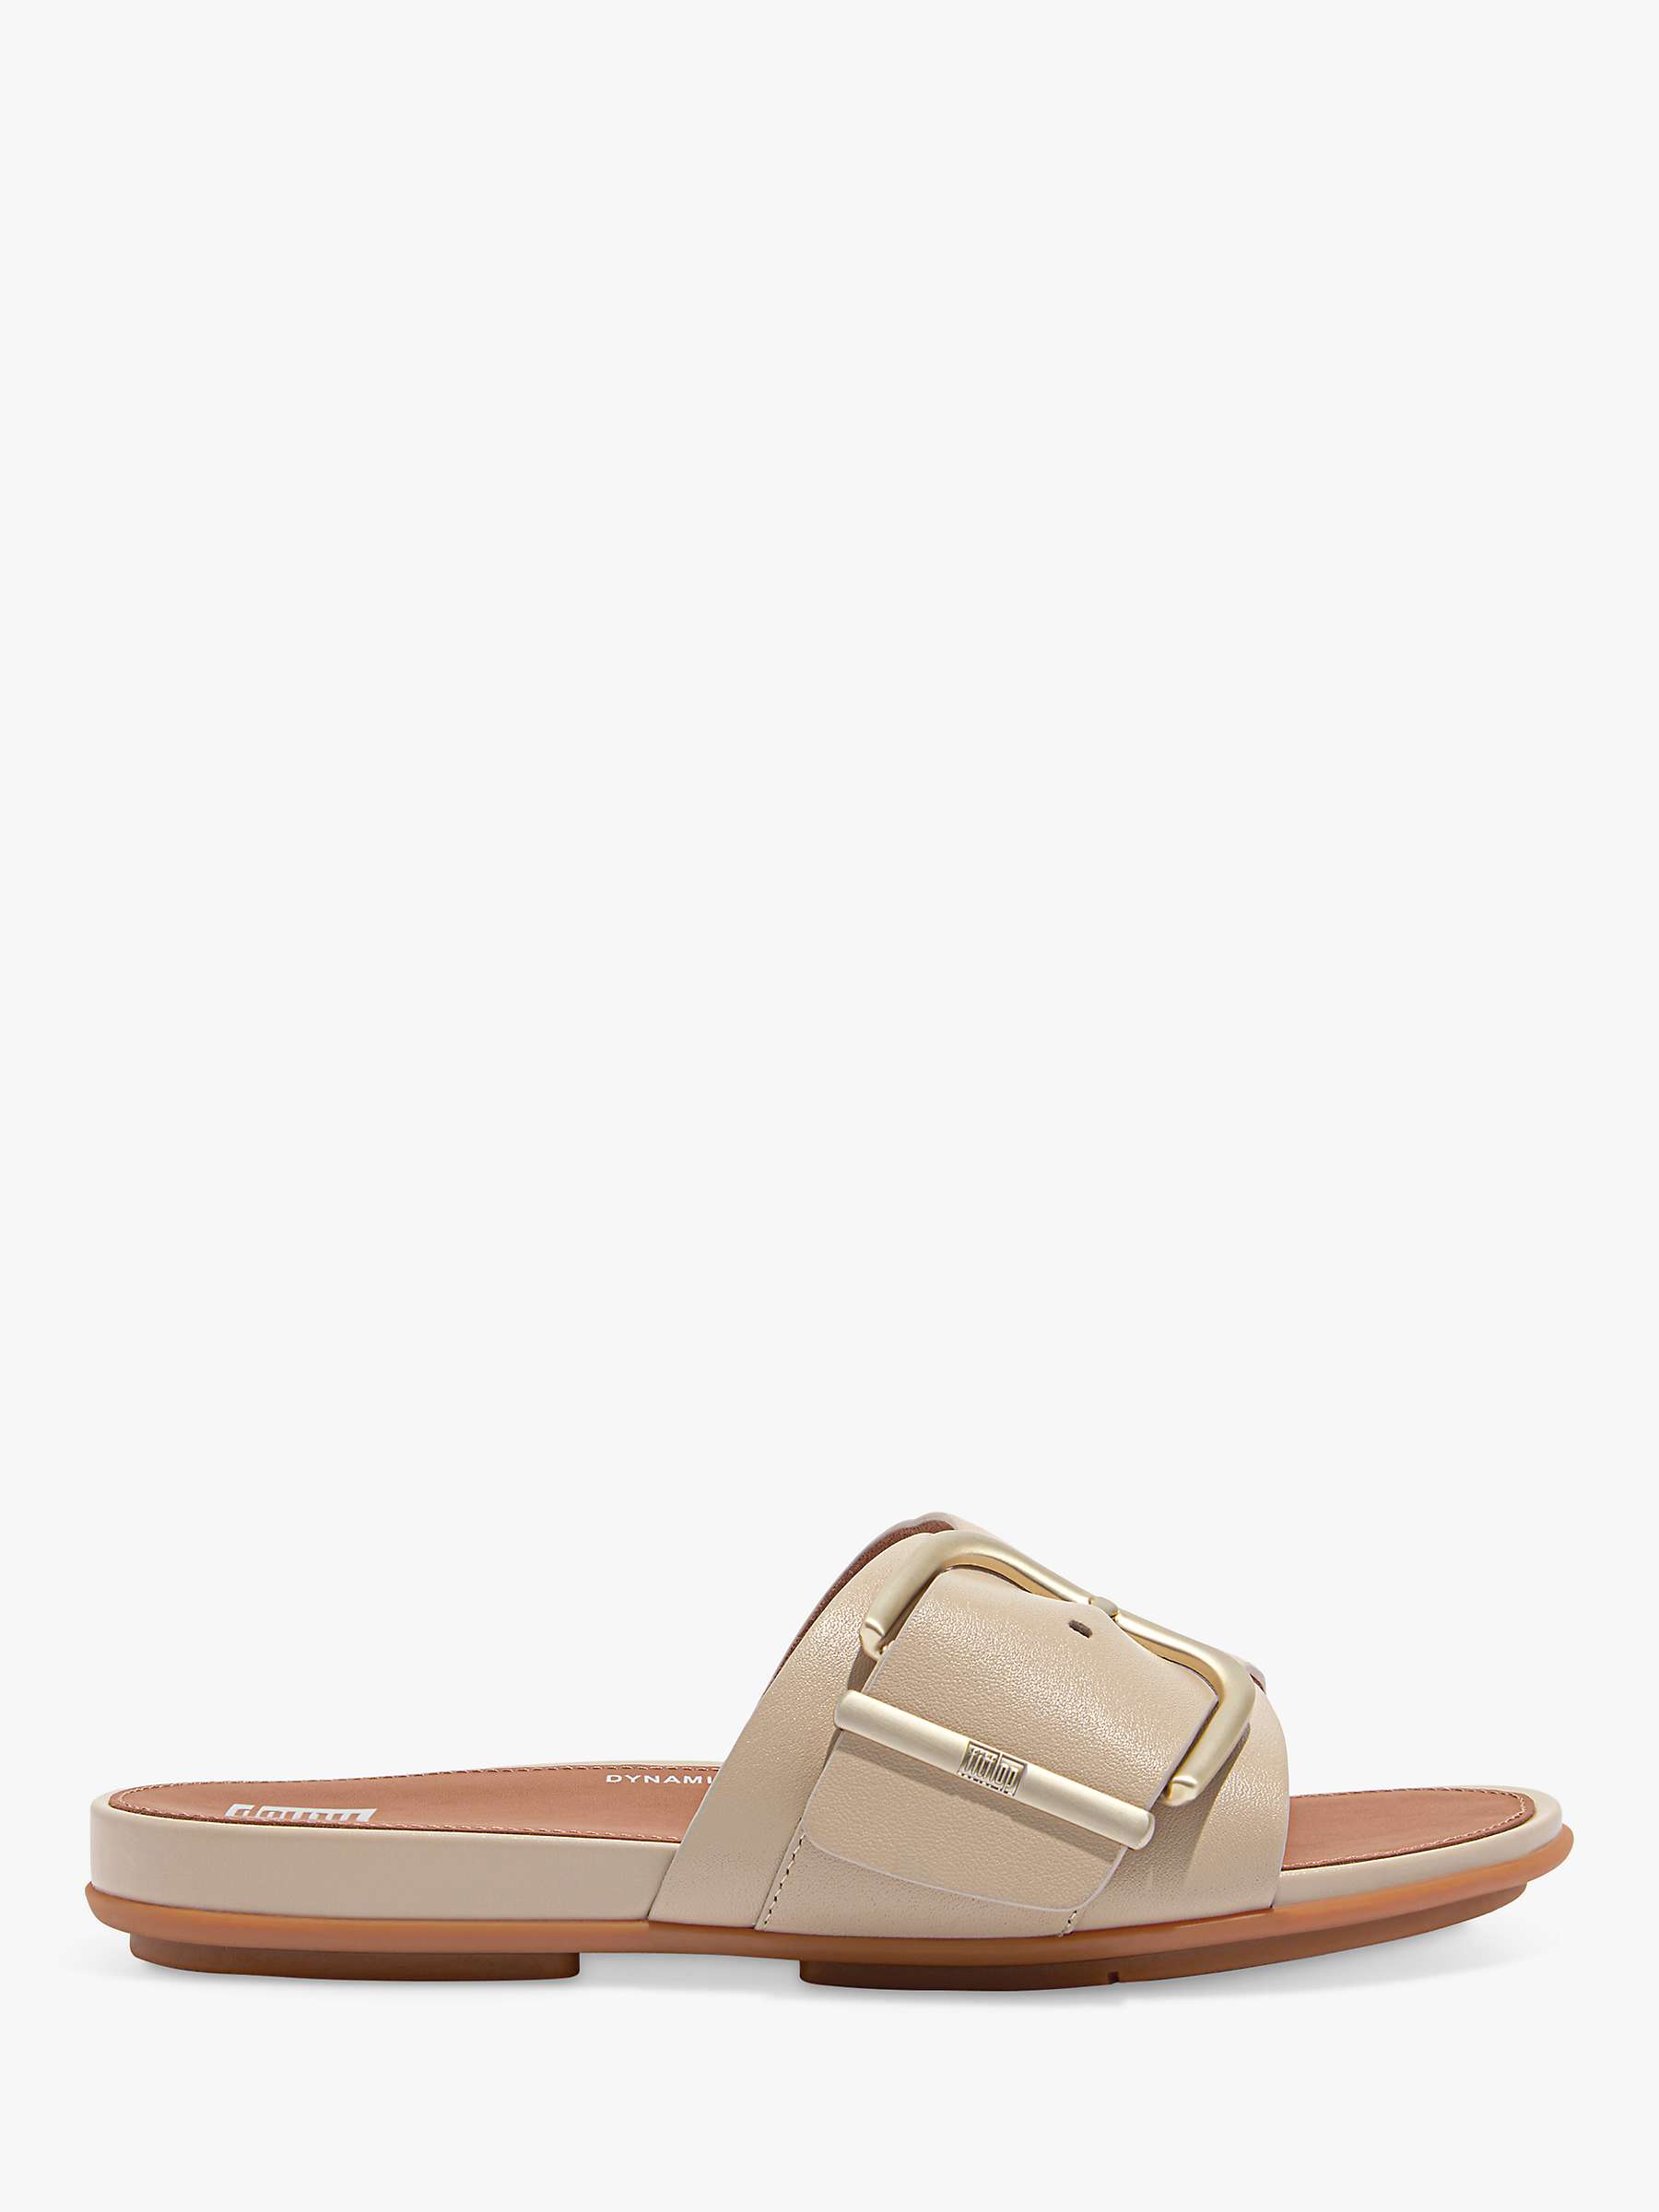 Buy FitFlop Gracie Buckle Pool Sandals, Stone Beige Online at johnlewis.com